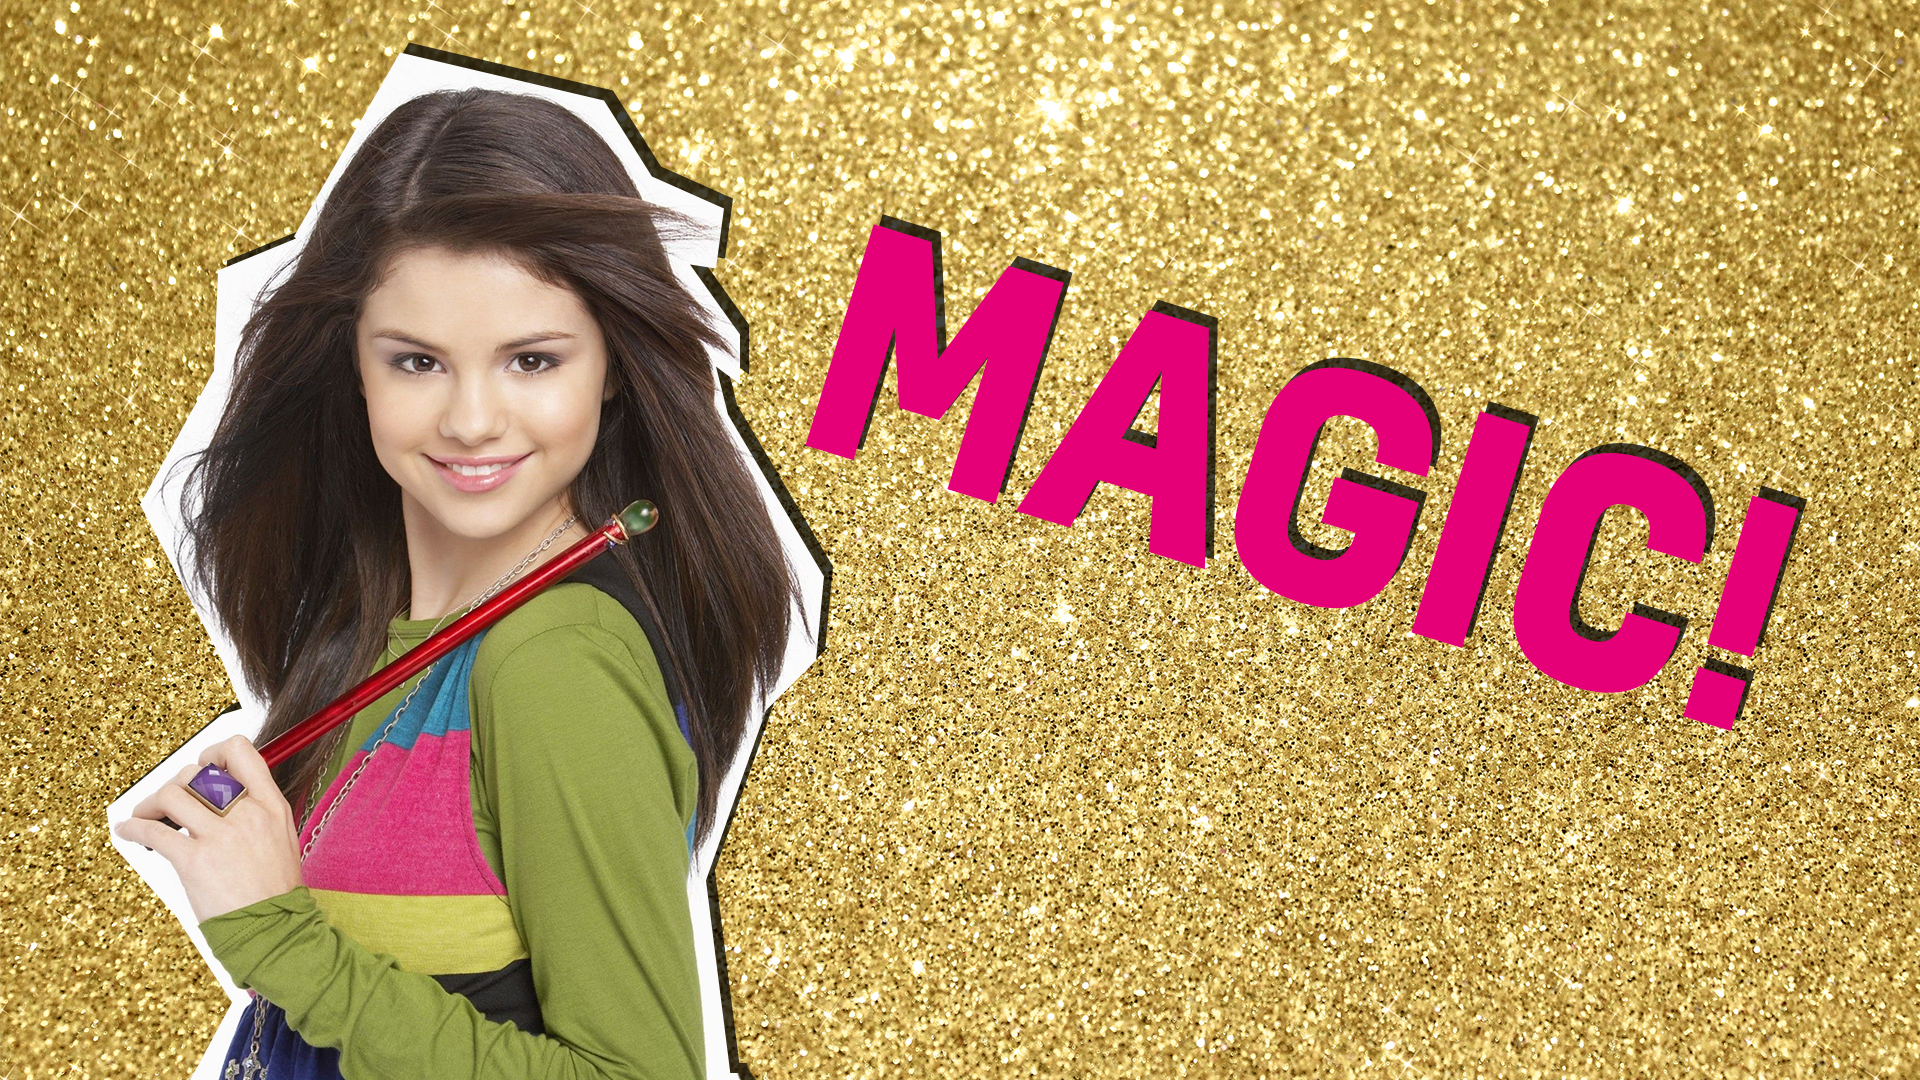 Wizards of Waverly Place Thumbnail